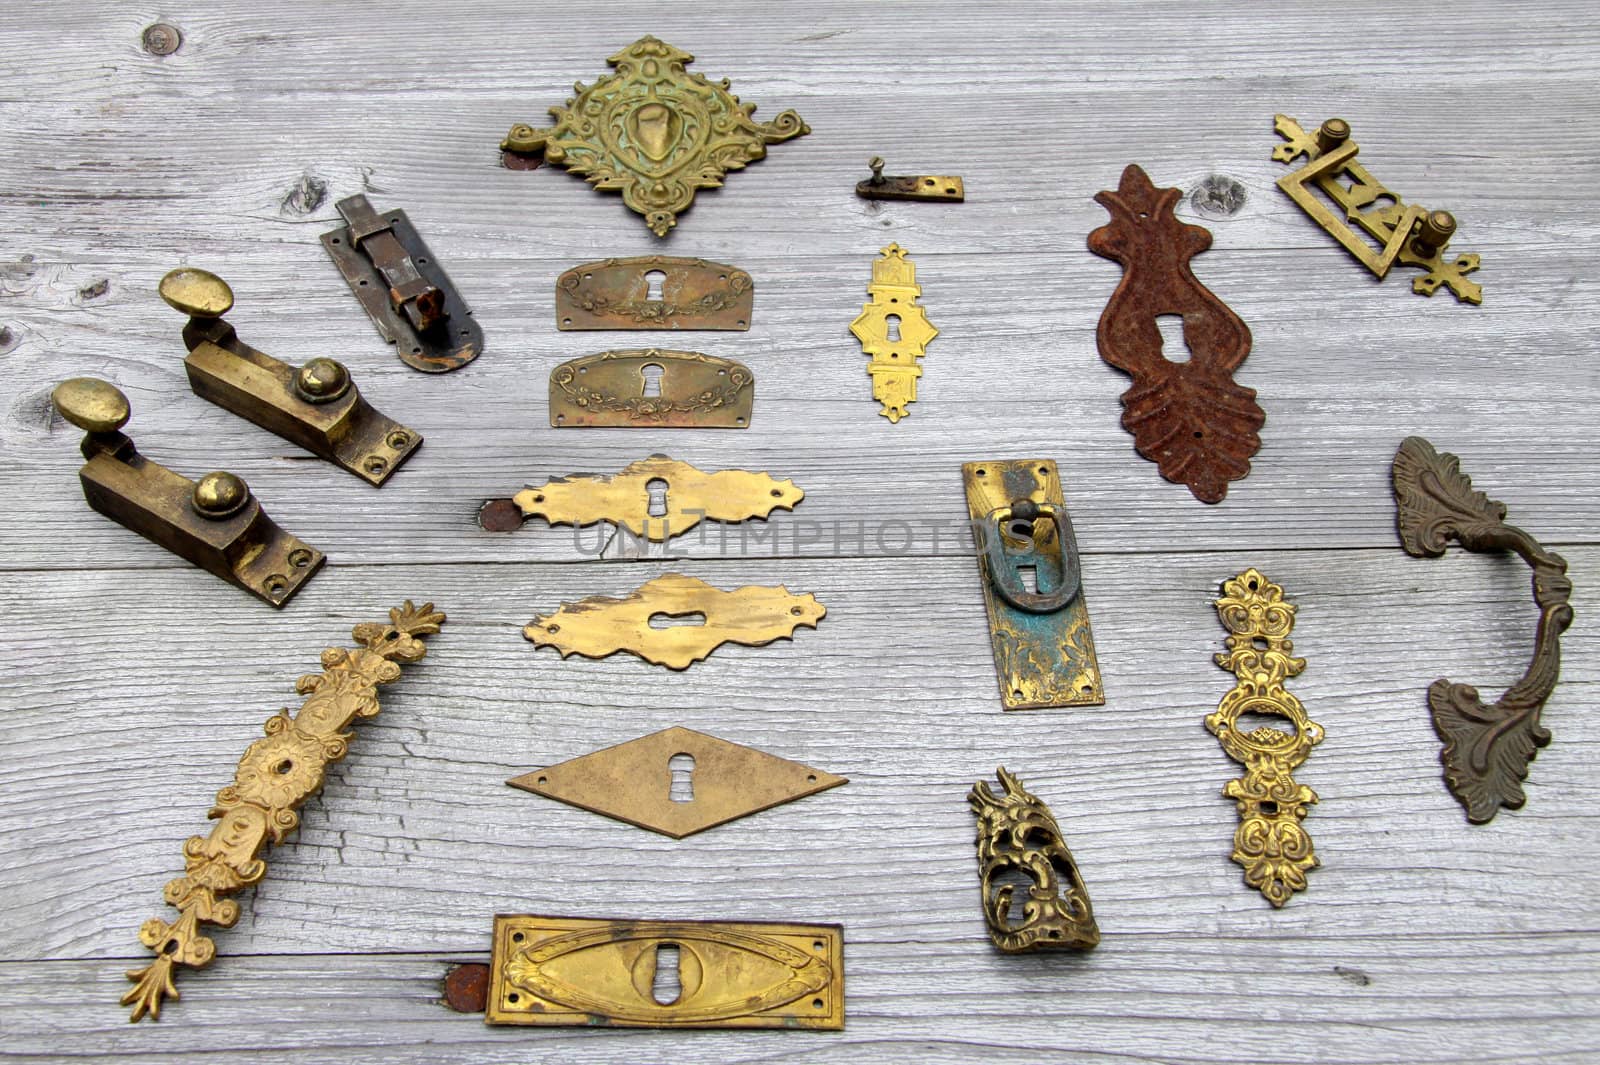 Many antique door locks and hardware designed for a weathered wooden board
 